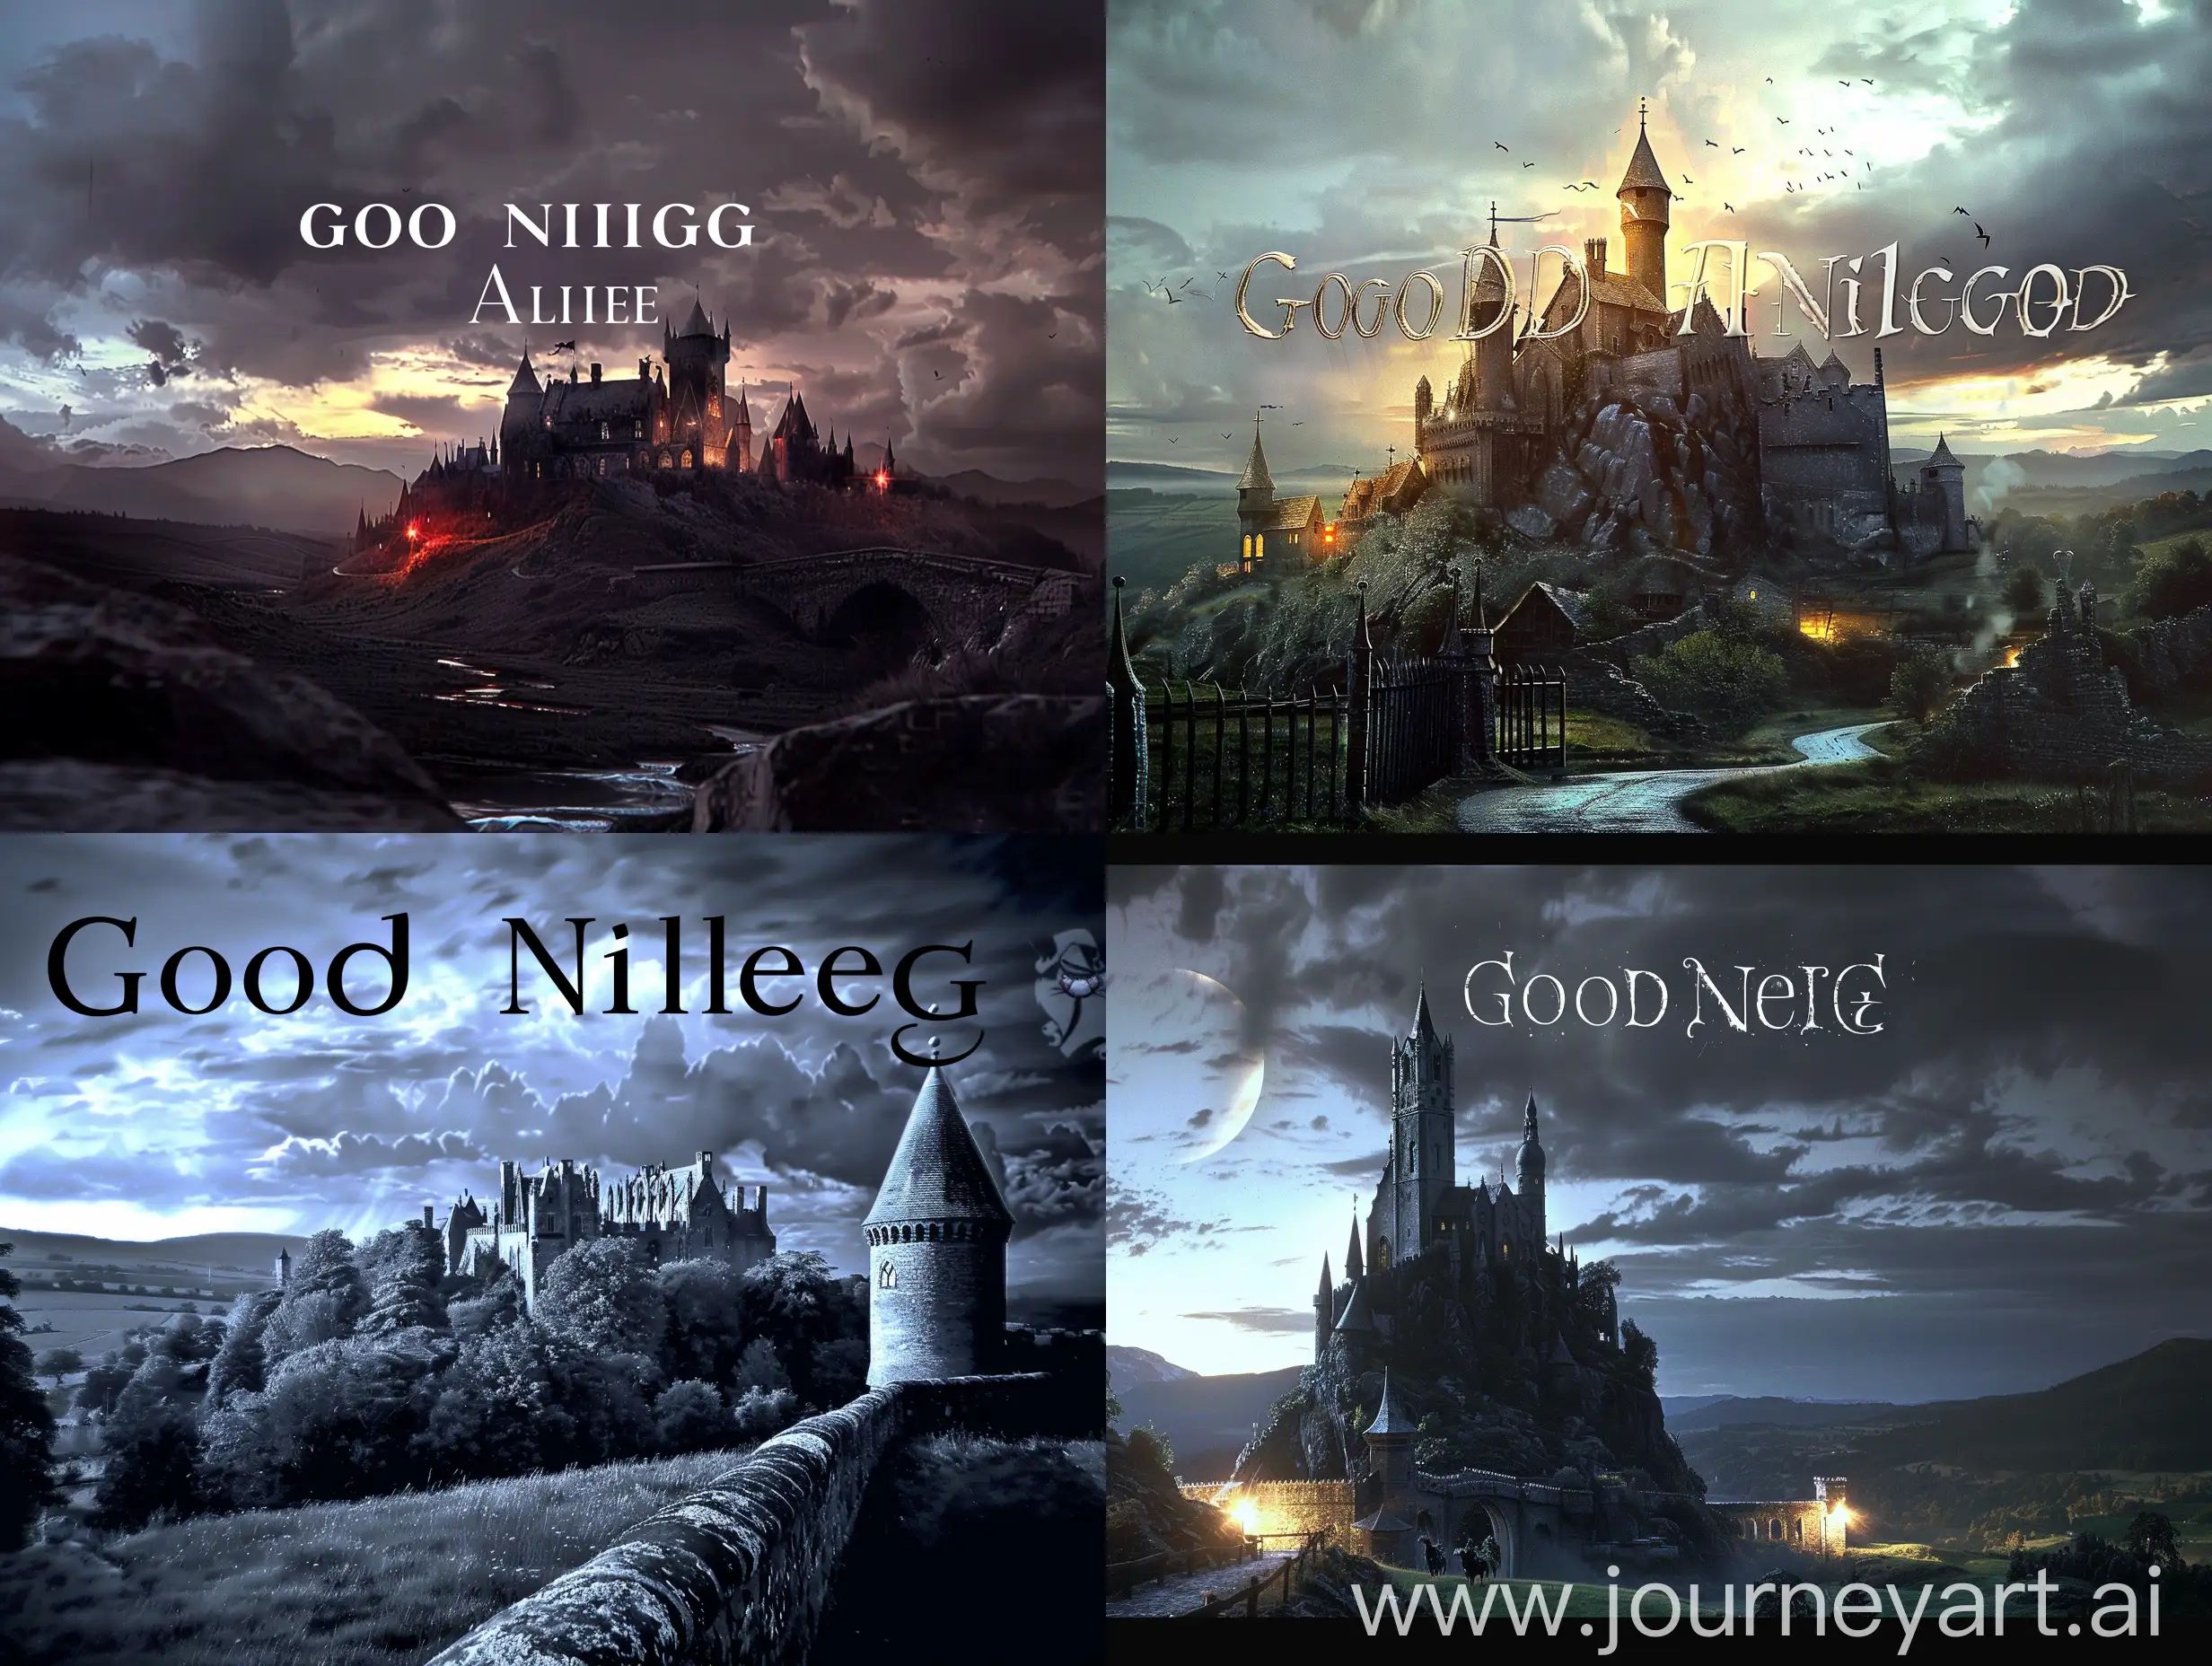 Medieval-Landscape-with-Good-Night-Alice-Text